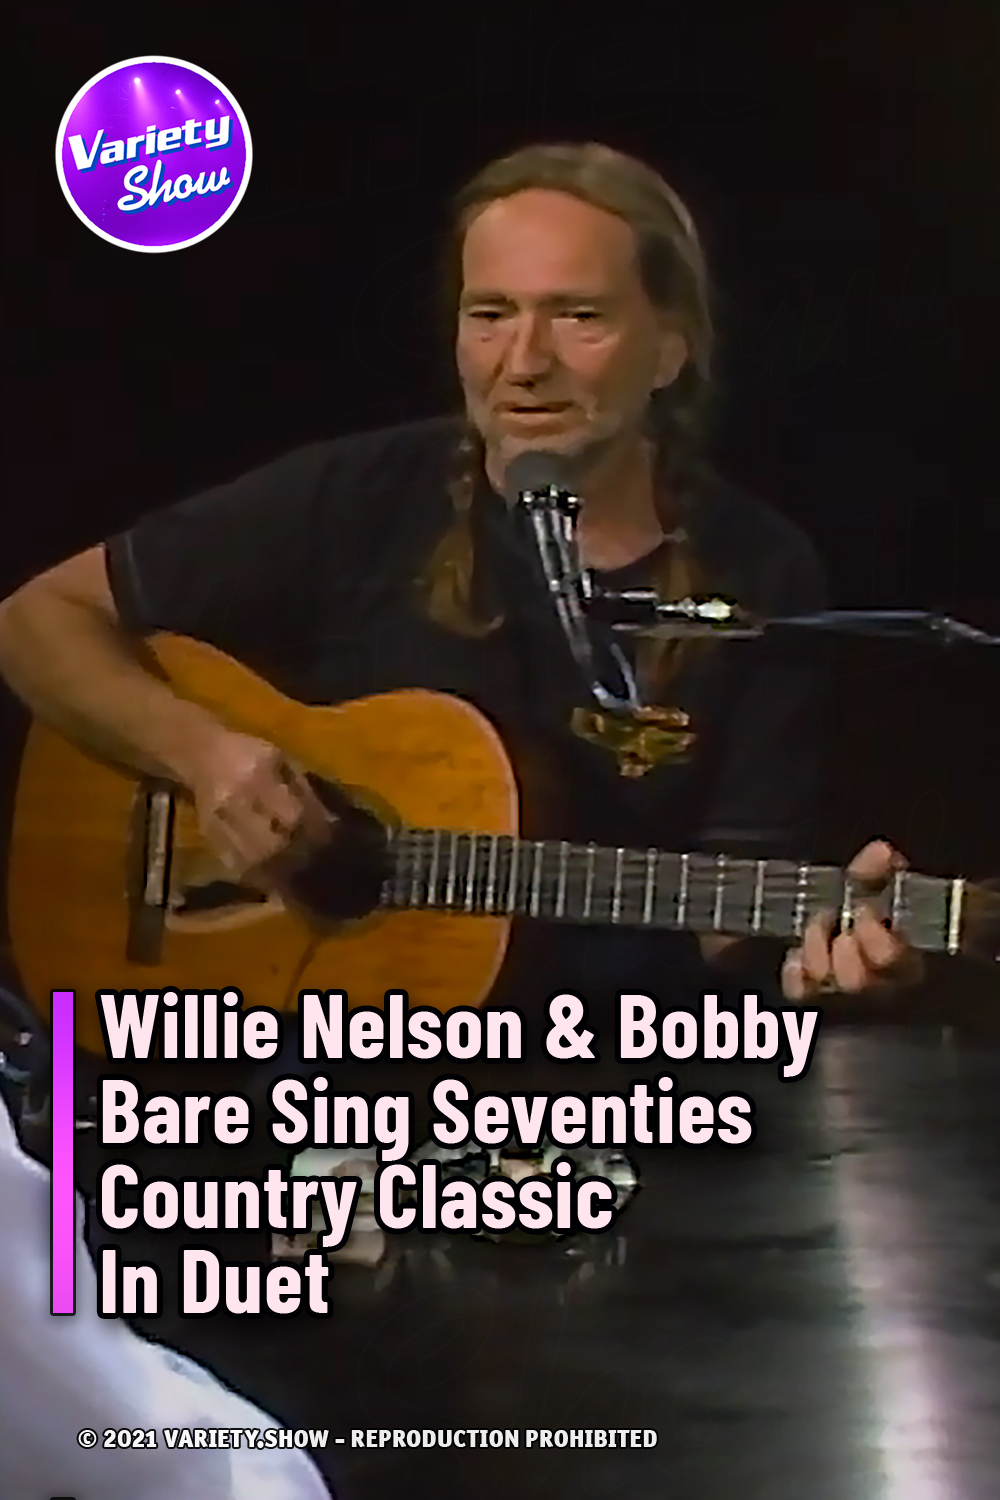 Willie Nelson & Bobby Bare Sing Seventies Country Classic In Duet